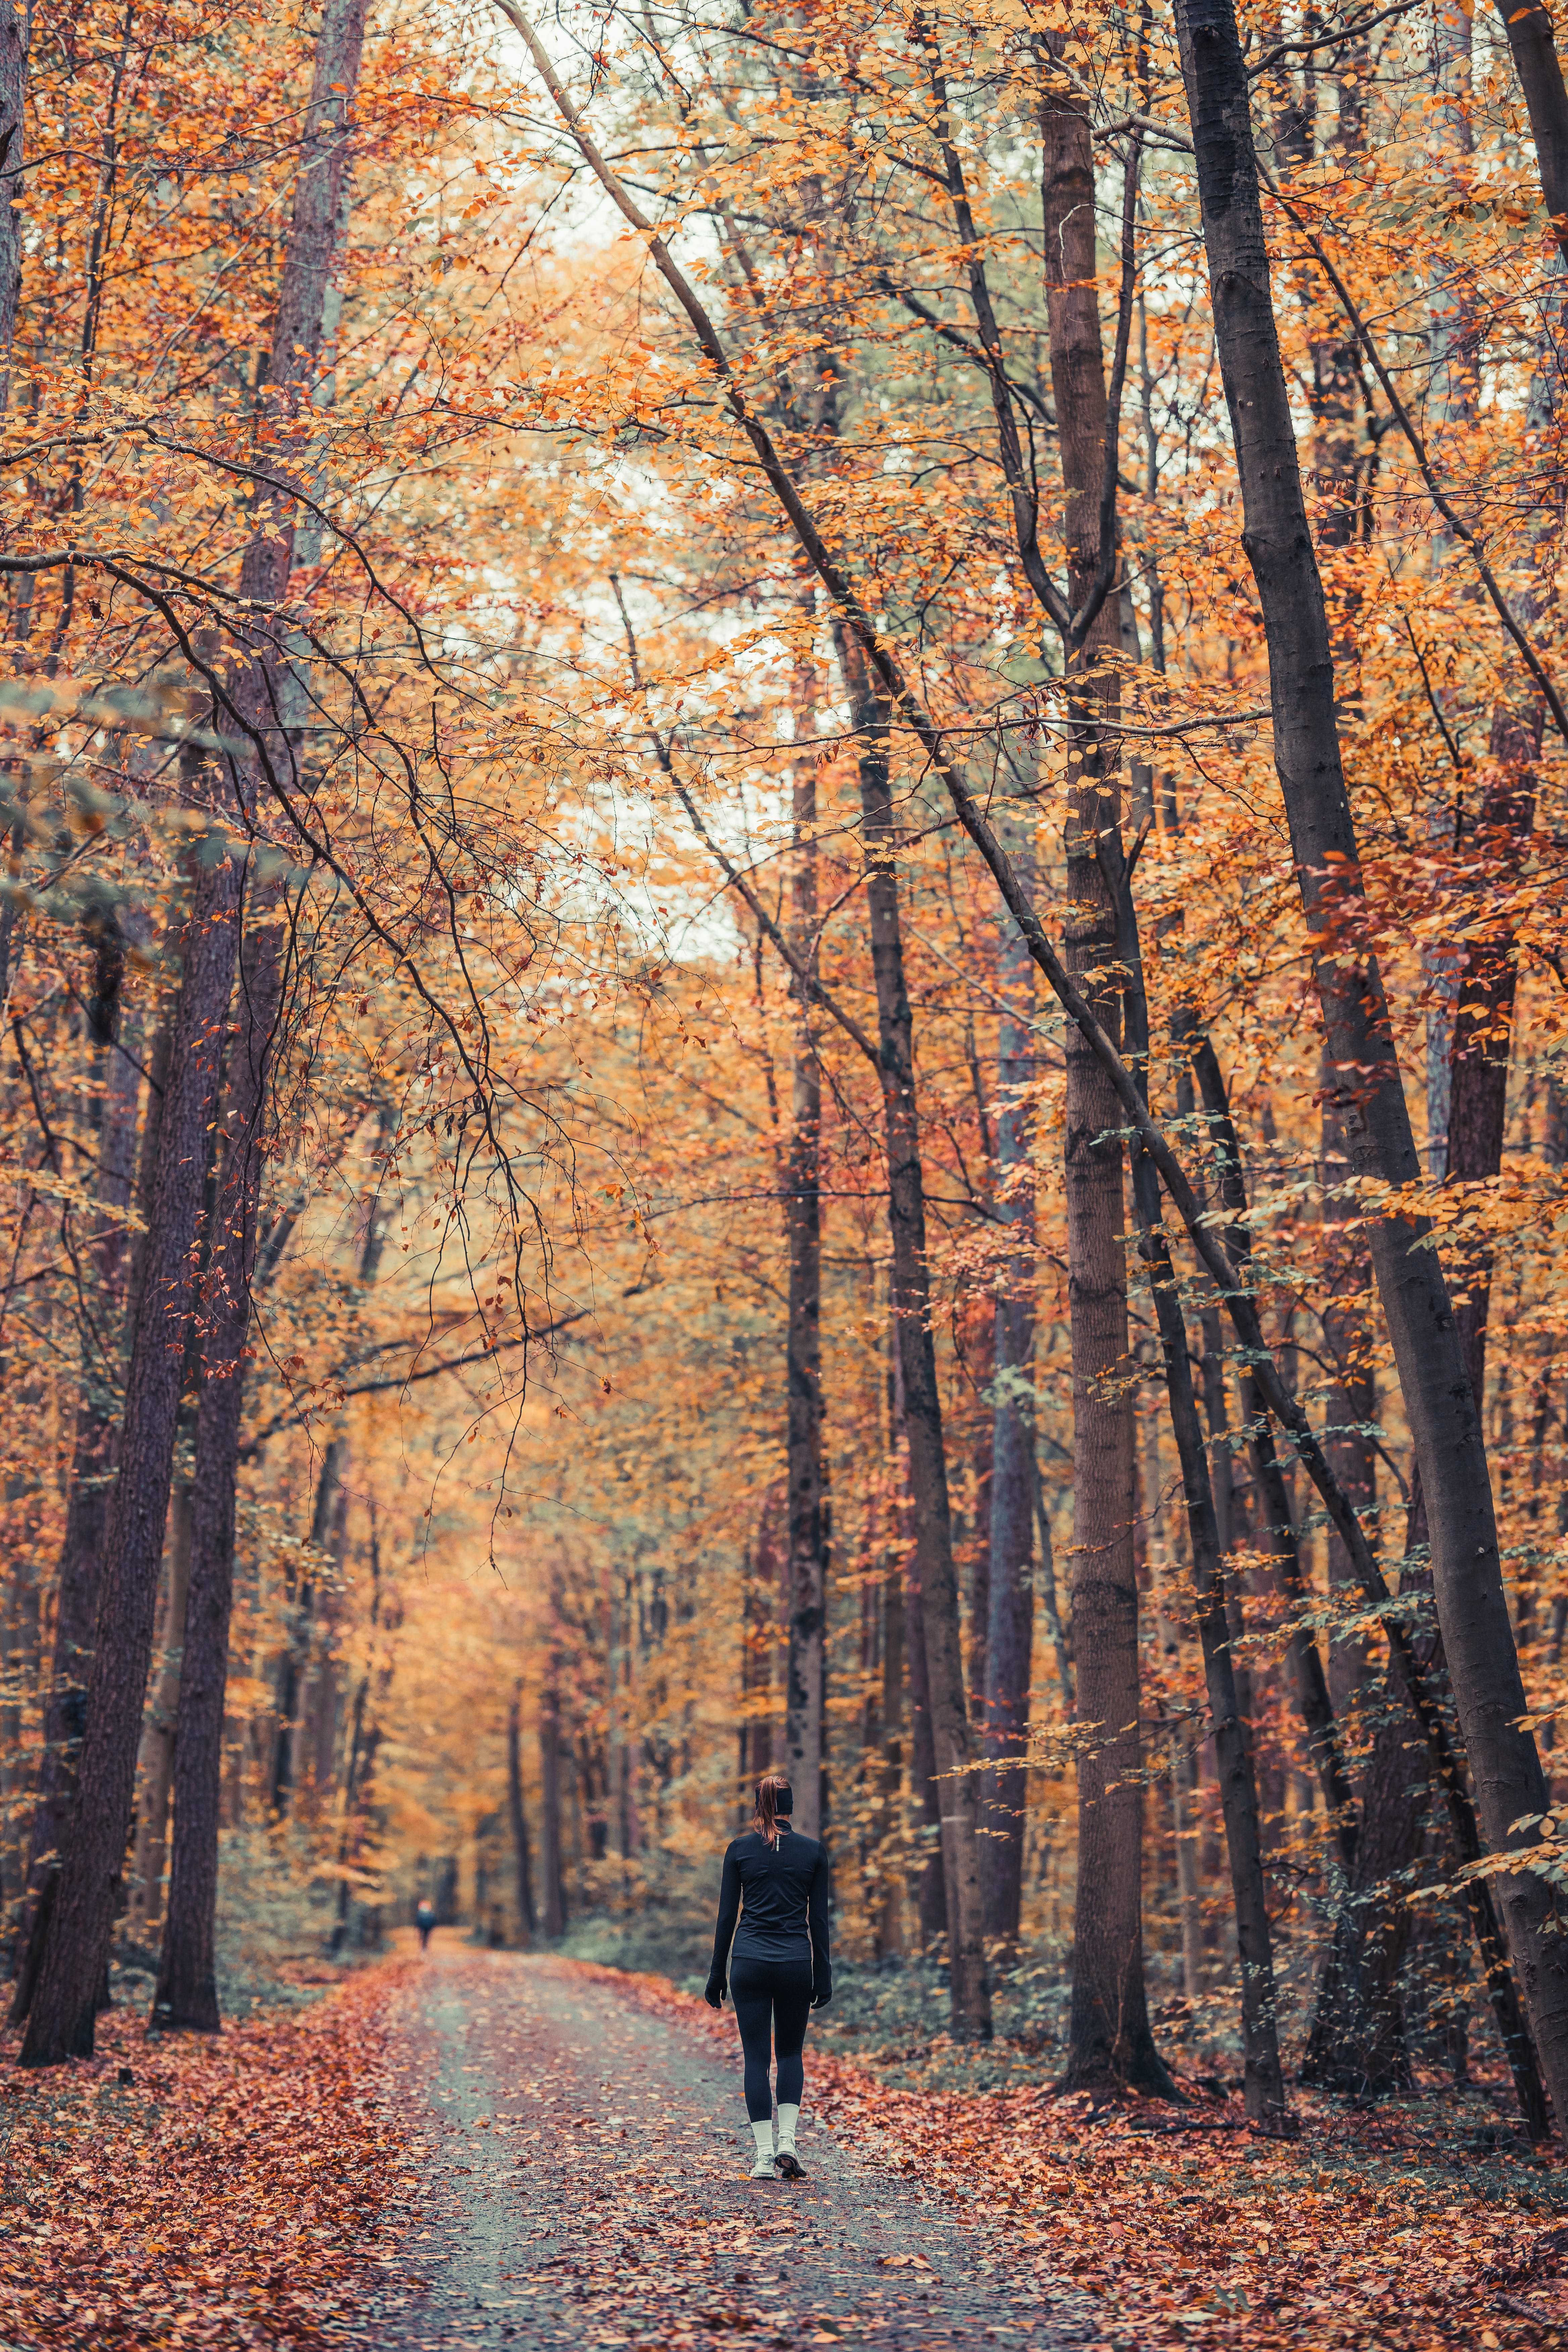 A woman walking in the park | Source: Pexels